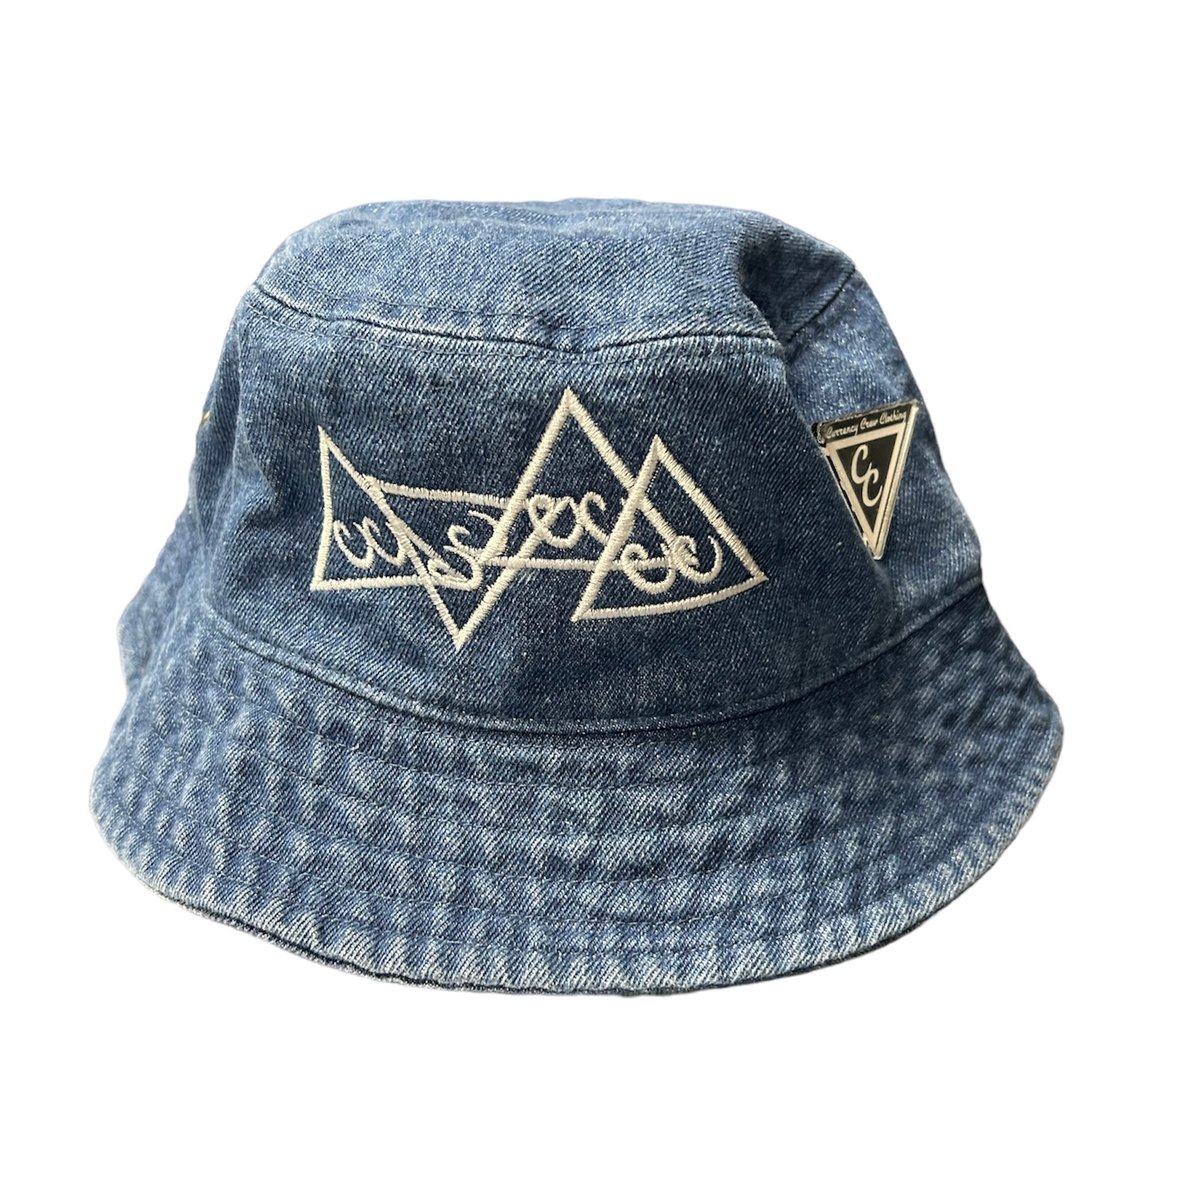 Currency Crew 4 Stacks Blue Denim Bucket Hat | Currency Crew Clothing